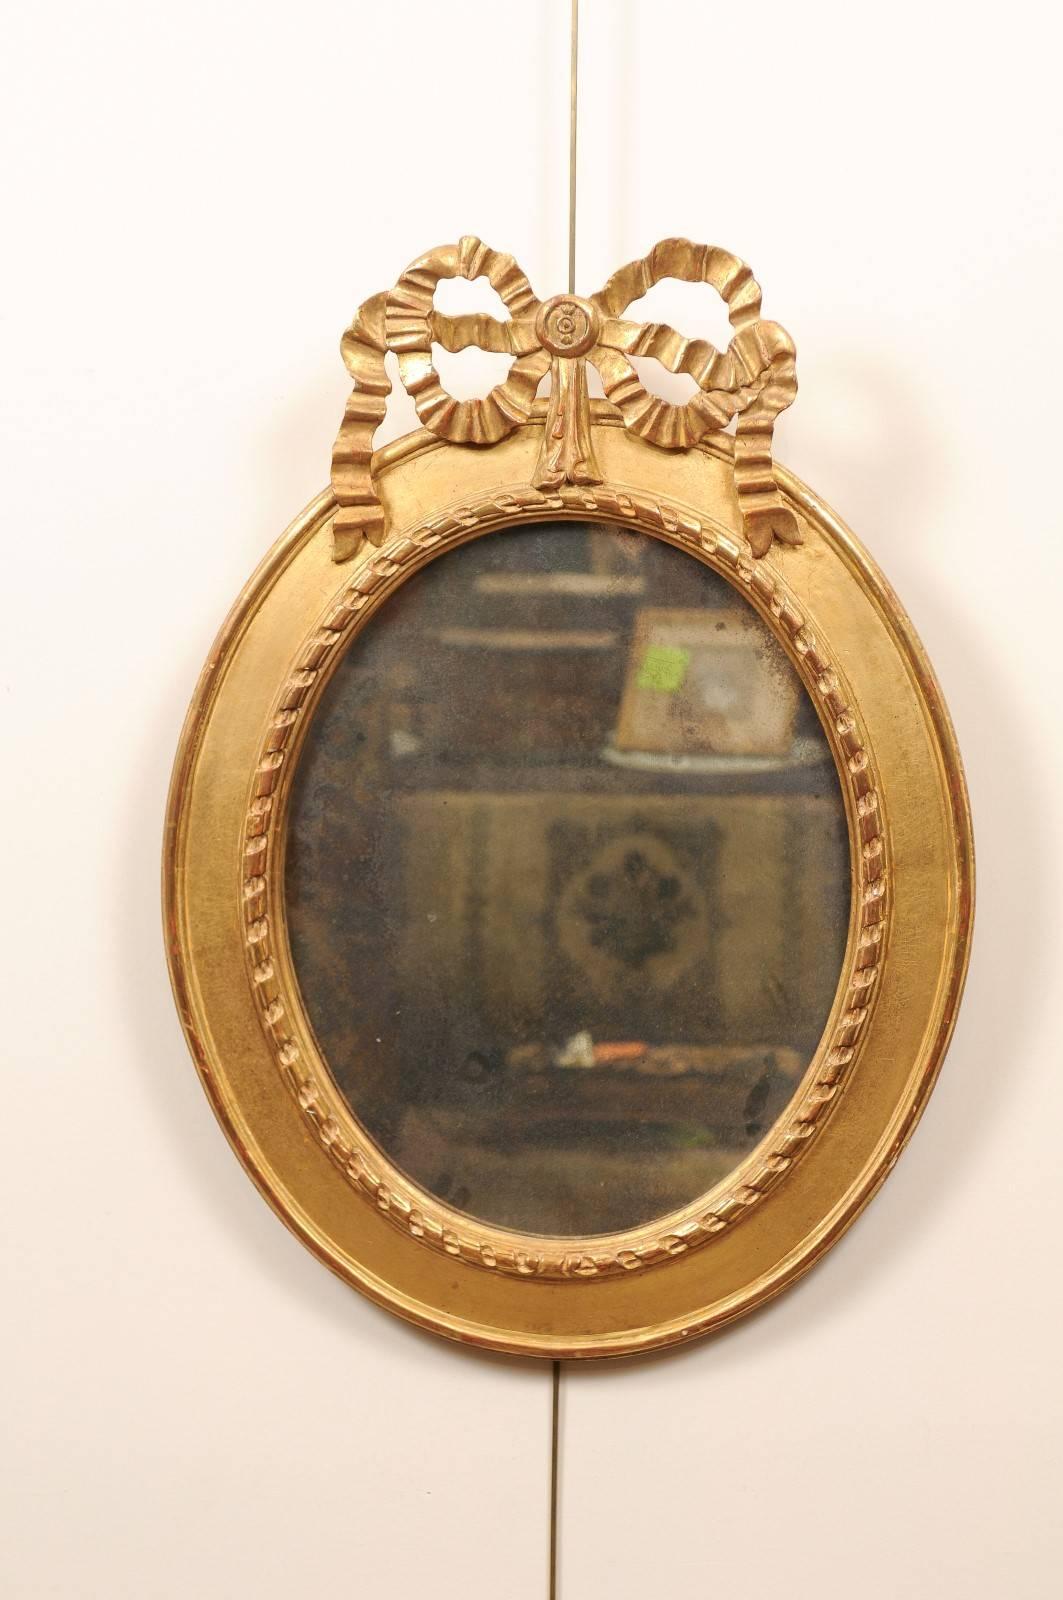 Pair of giltwood oval bow-topped mirrors, 20th century. Both mirrors plates with aging treatment.